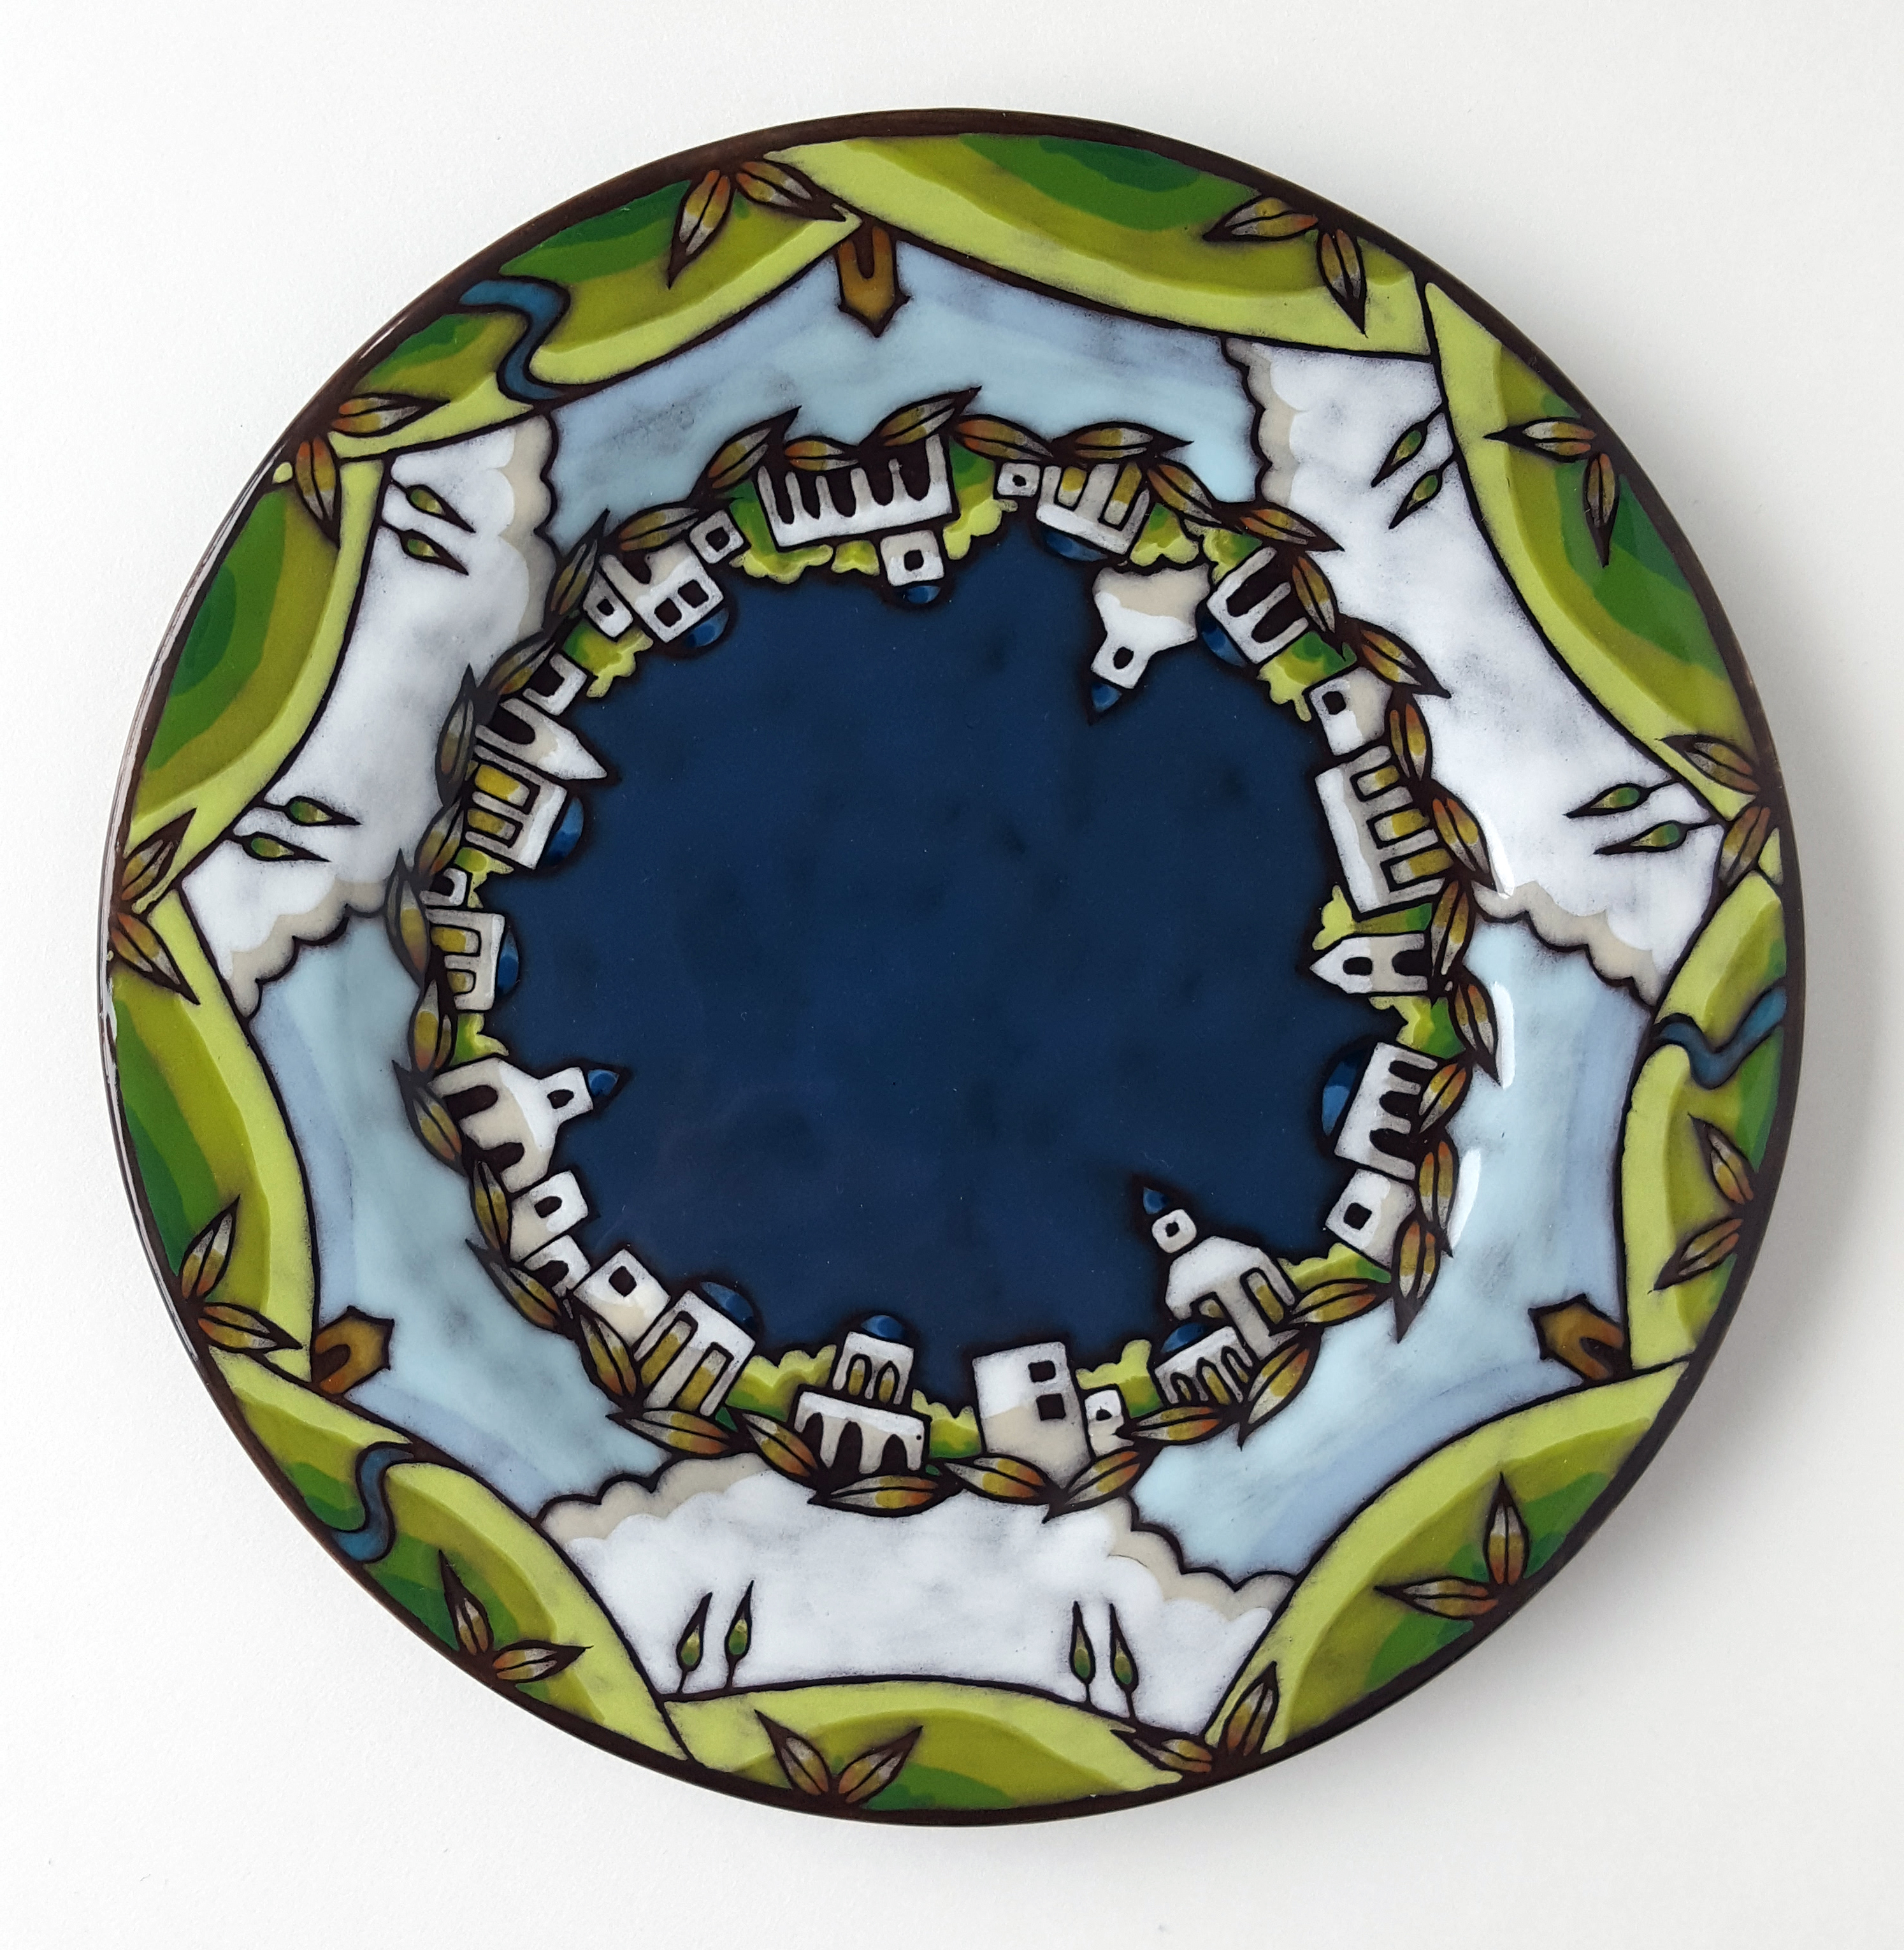 Plate with images of white buildings, leaves, and hills in a circle